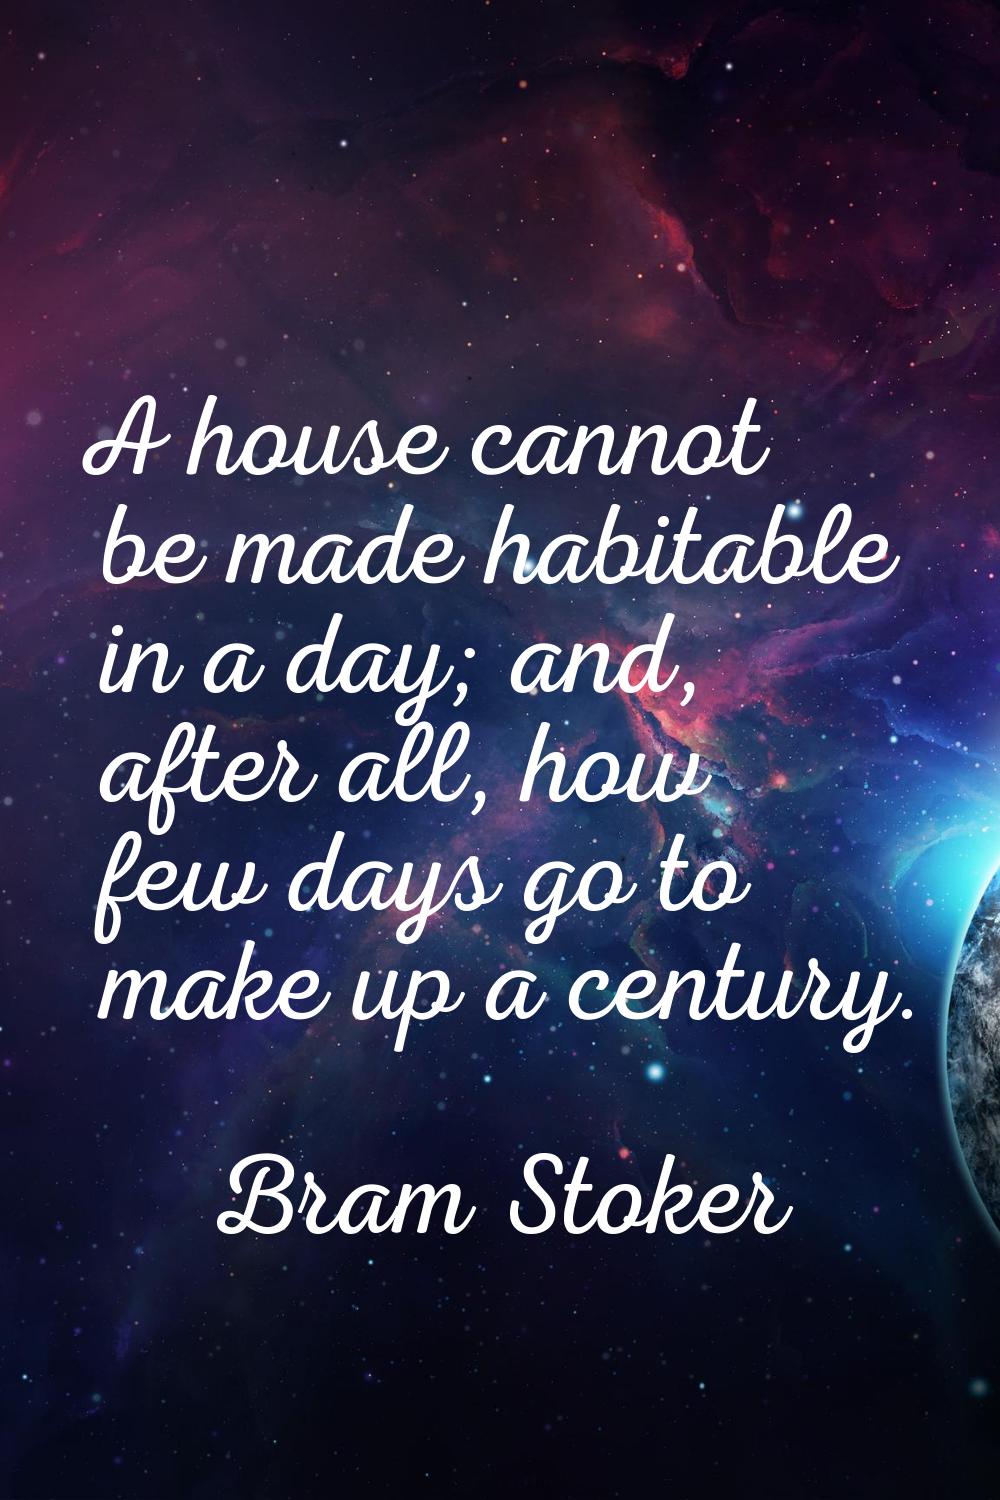 A house cannot be made habitable in a day; and, after all, how few days go to make up a century.